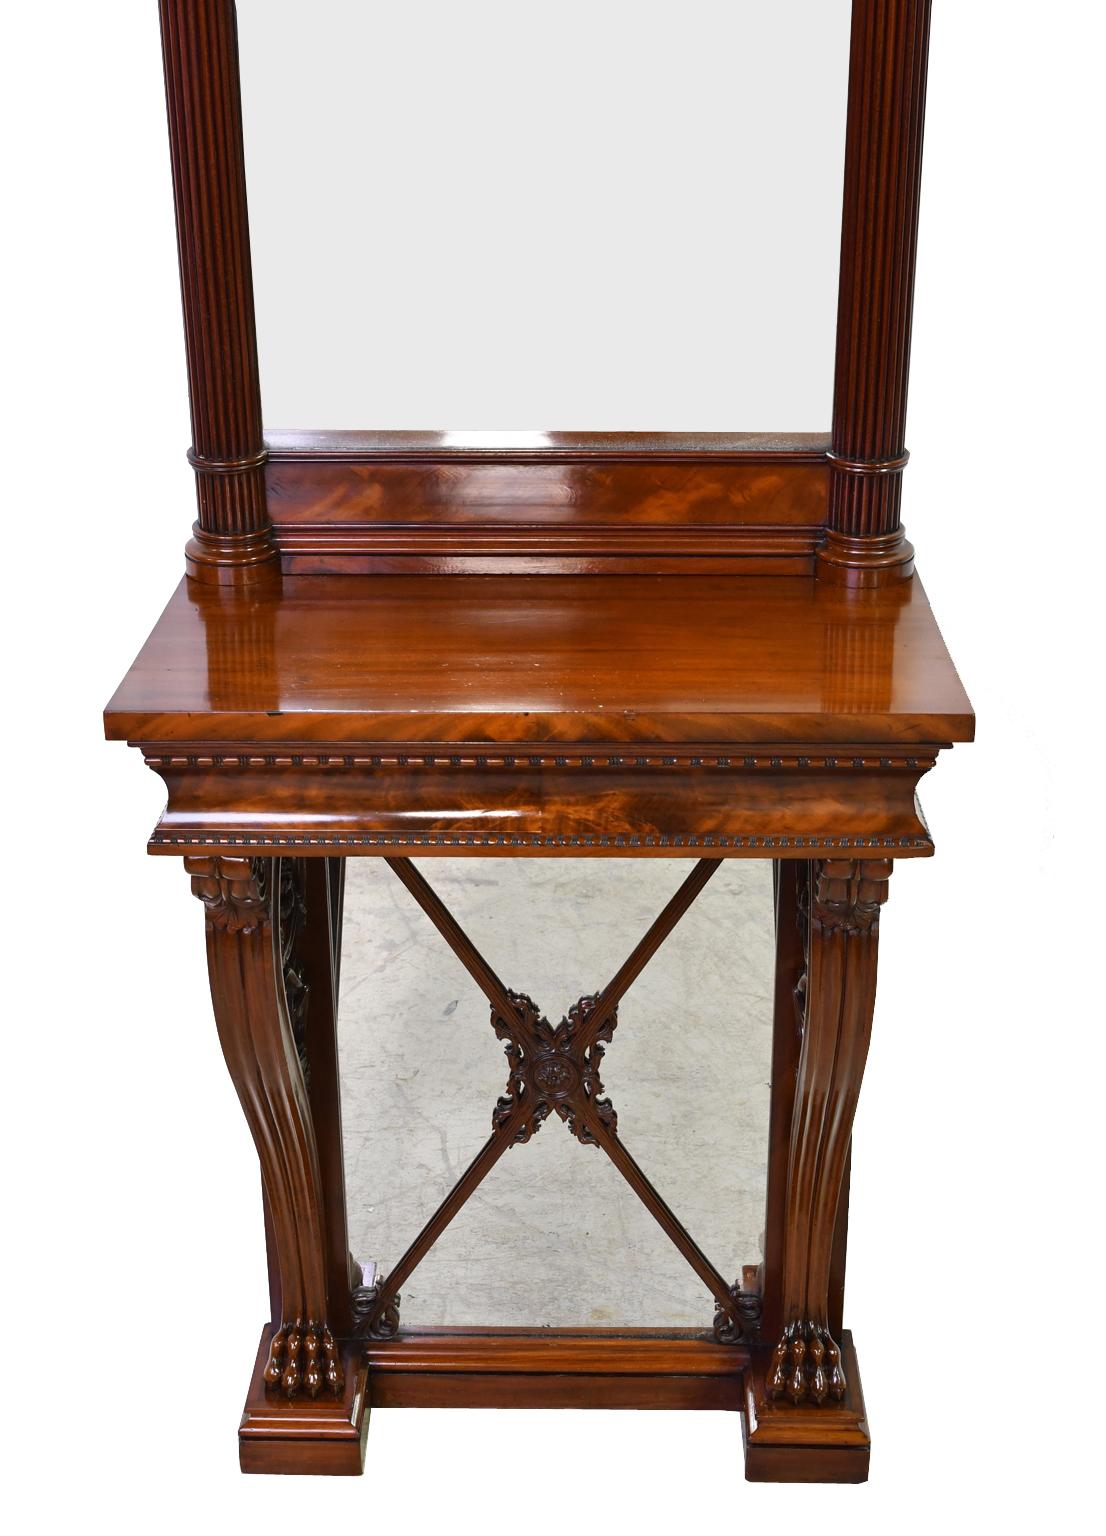 Polished Tall Neoclassical-Style Console & Pier Mirror in Mahogany, Denmark, c. 1830